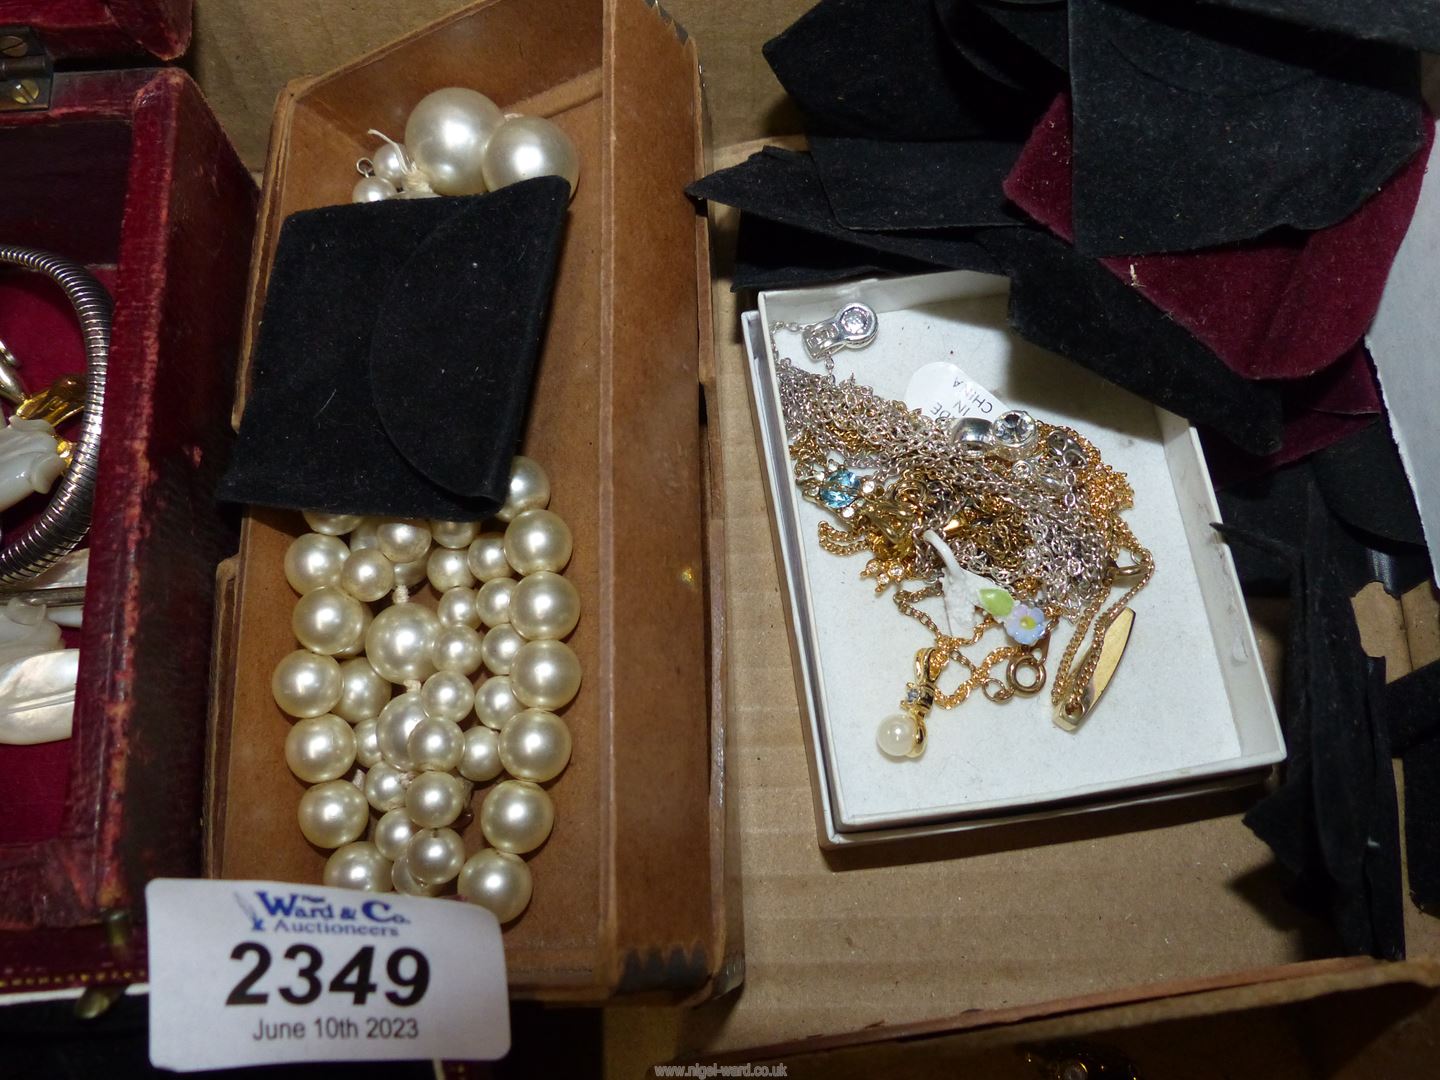 A quantity of costume jewellery in a jewellery box including simulated pearls, earrings, necklaces, - Image 4 of 4